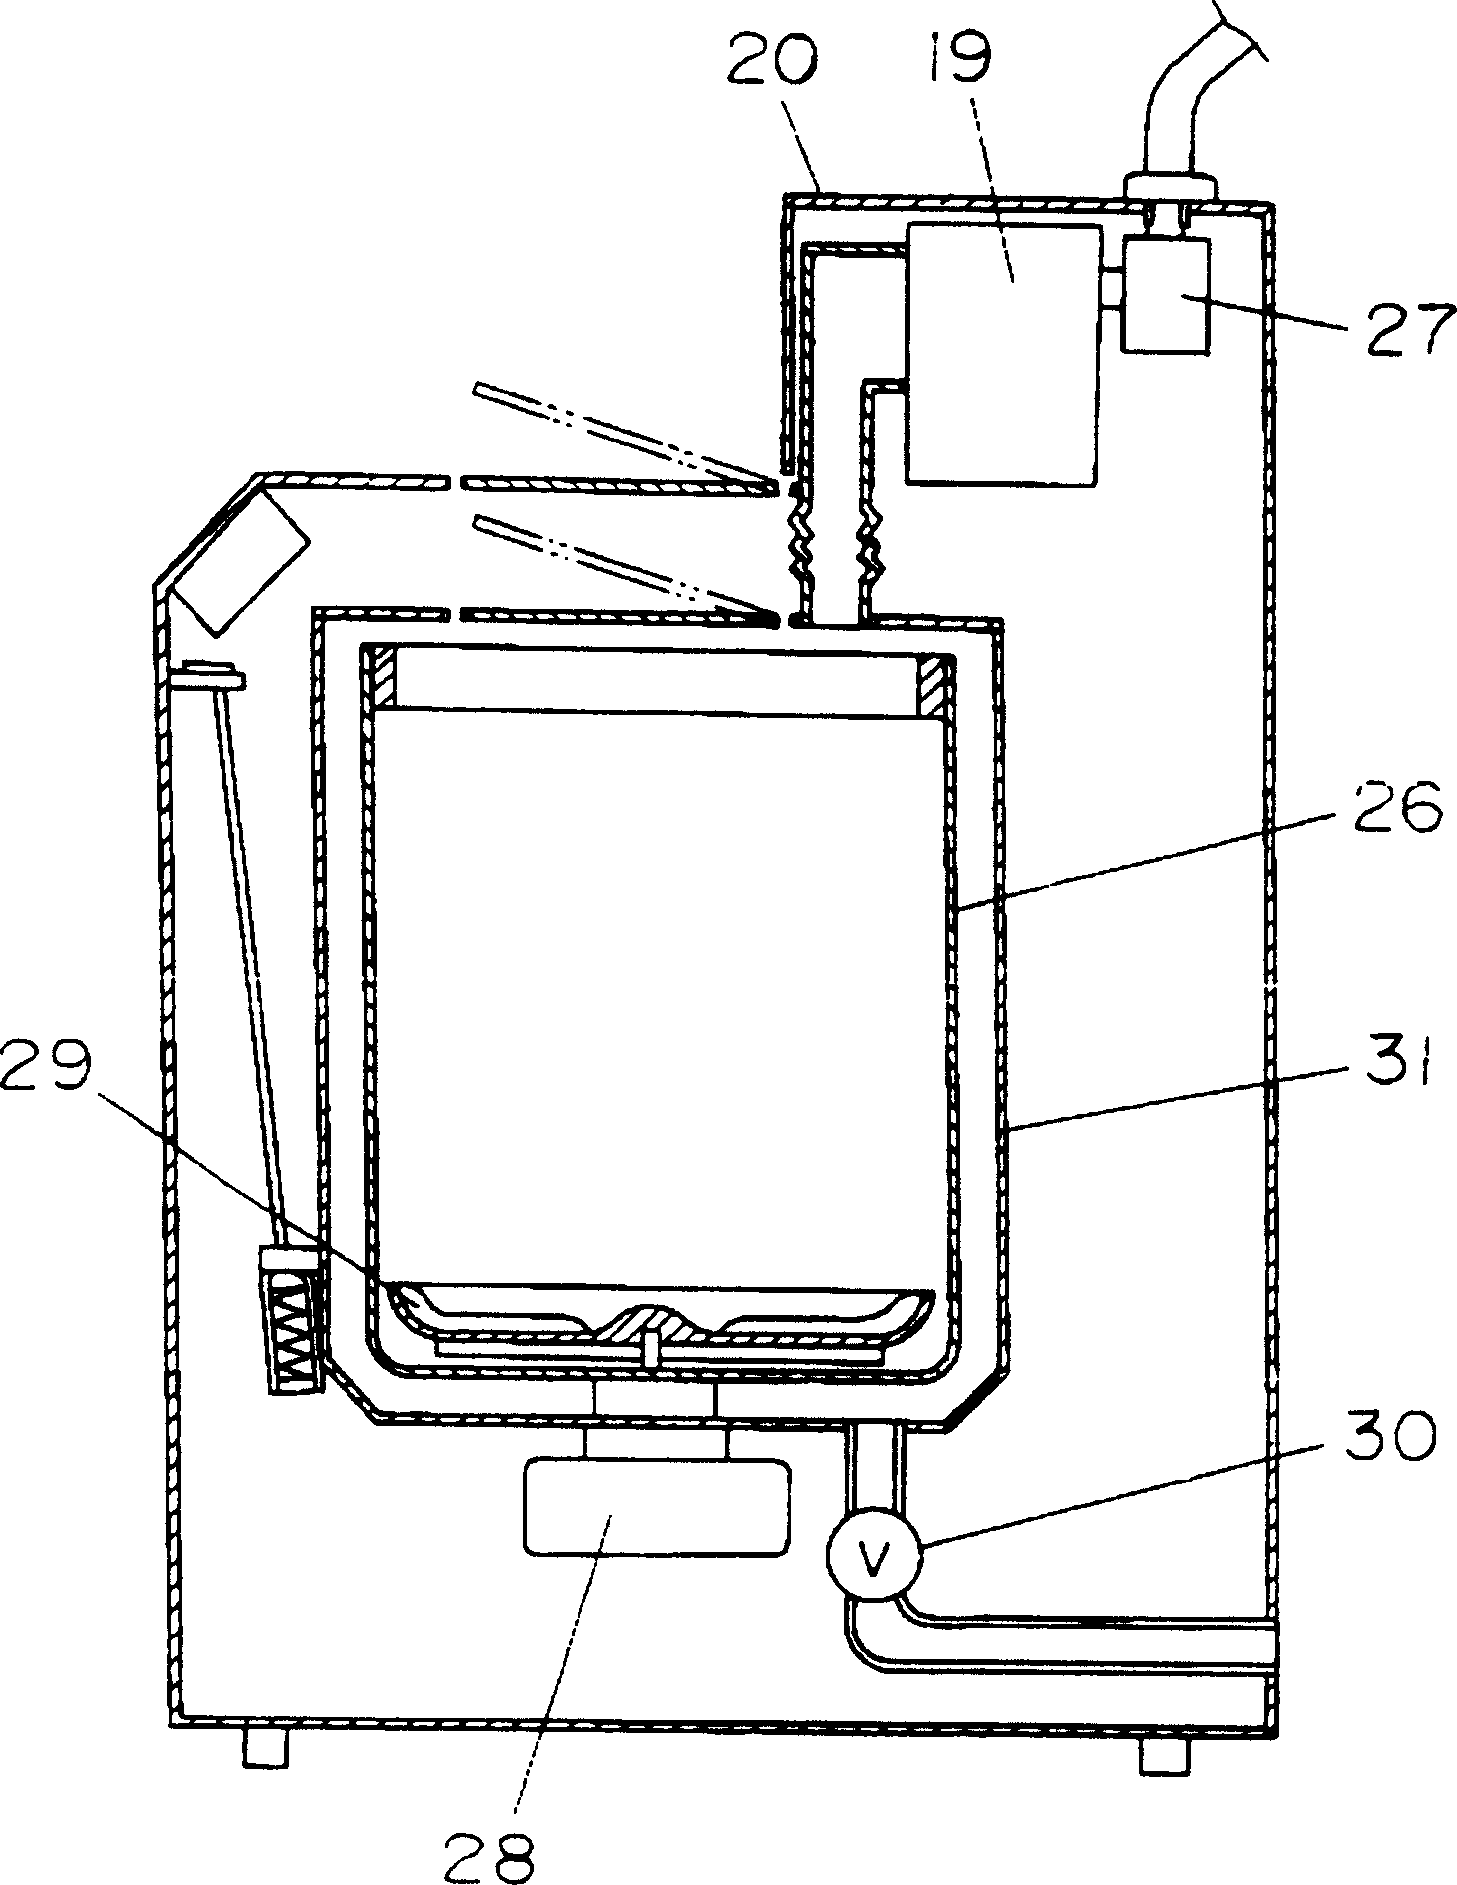 Pulverization generating device, dishware cleaning machine and washing machine mounting with the apparatus